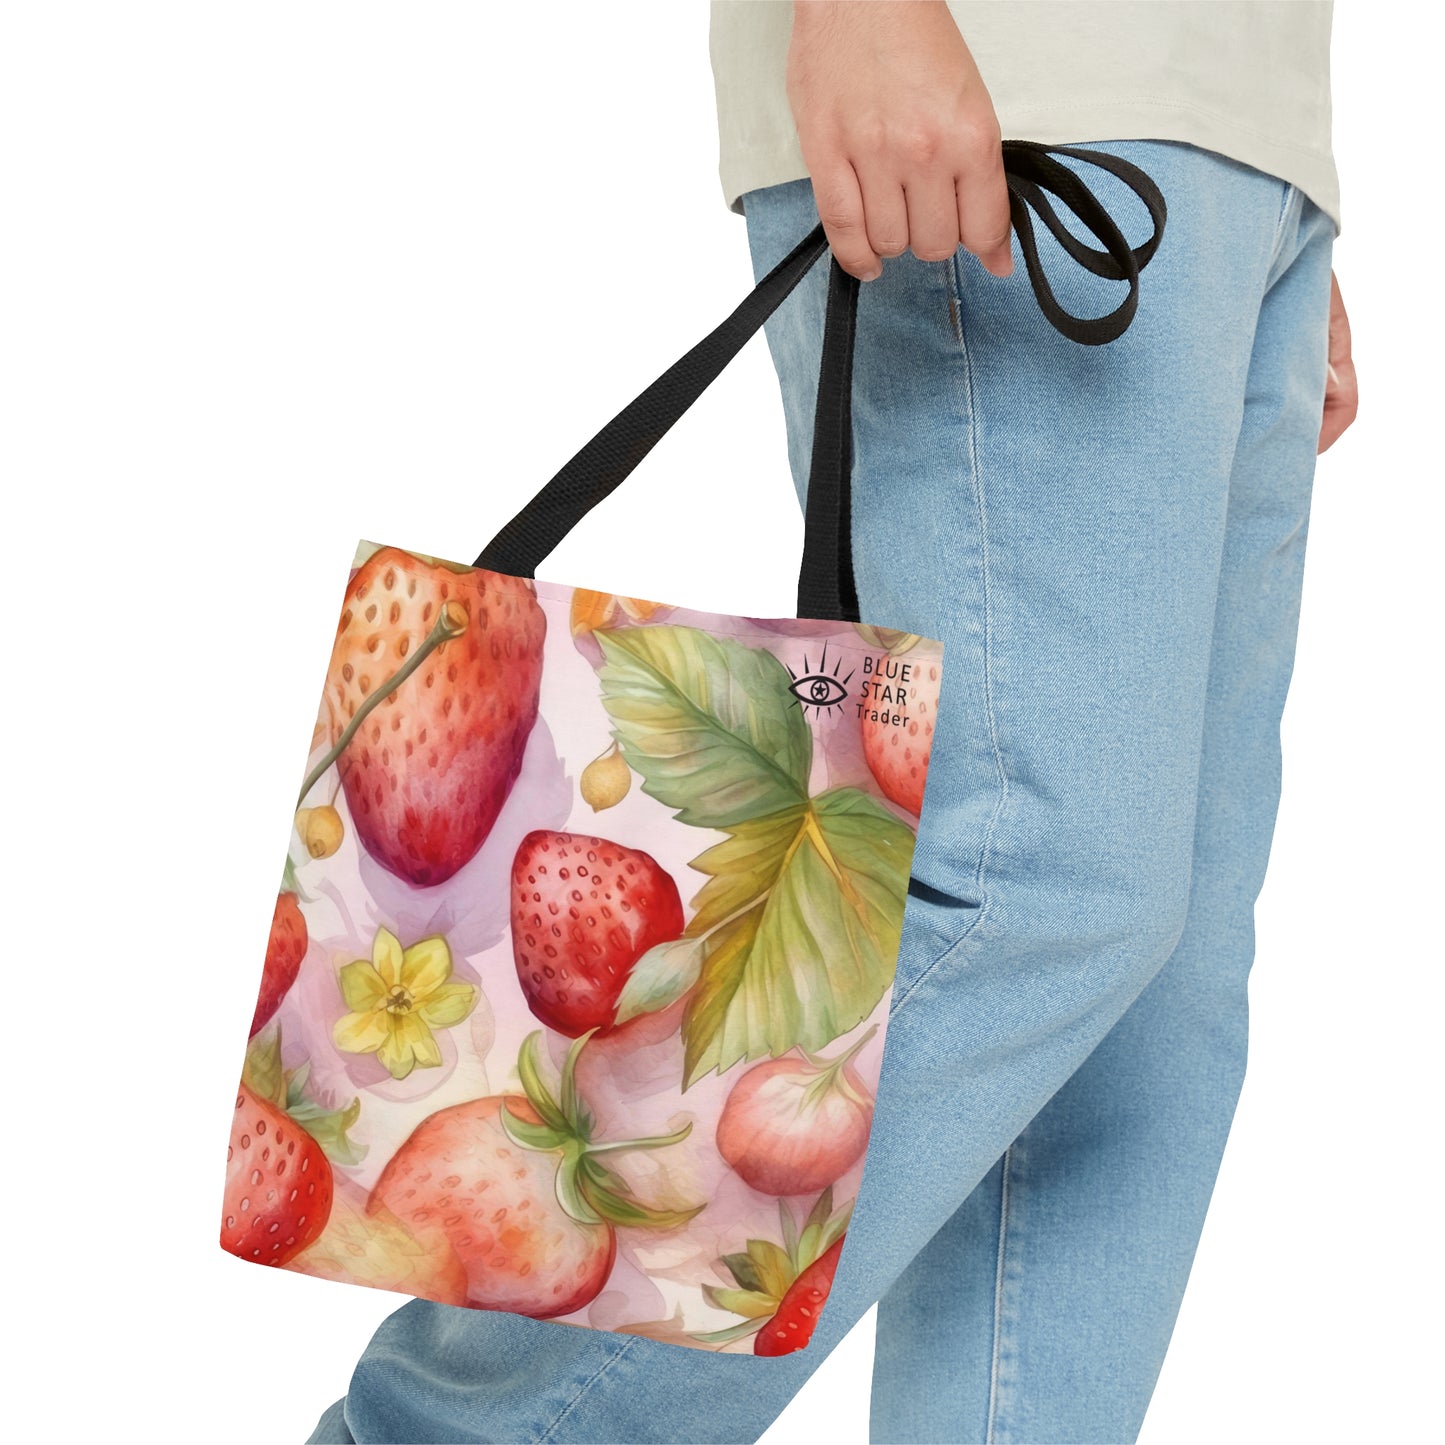 Cute Pink Strawberries Tote Bag, Polyester Canvas Tote Bag